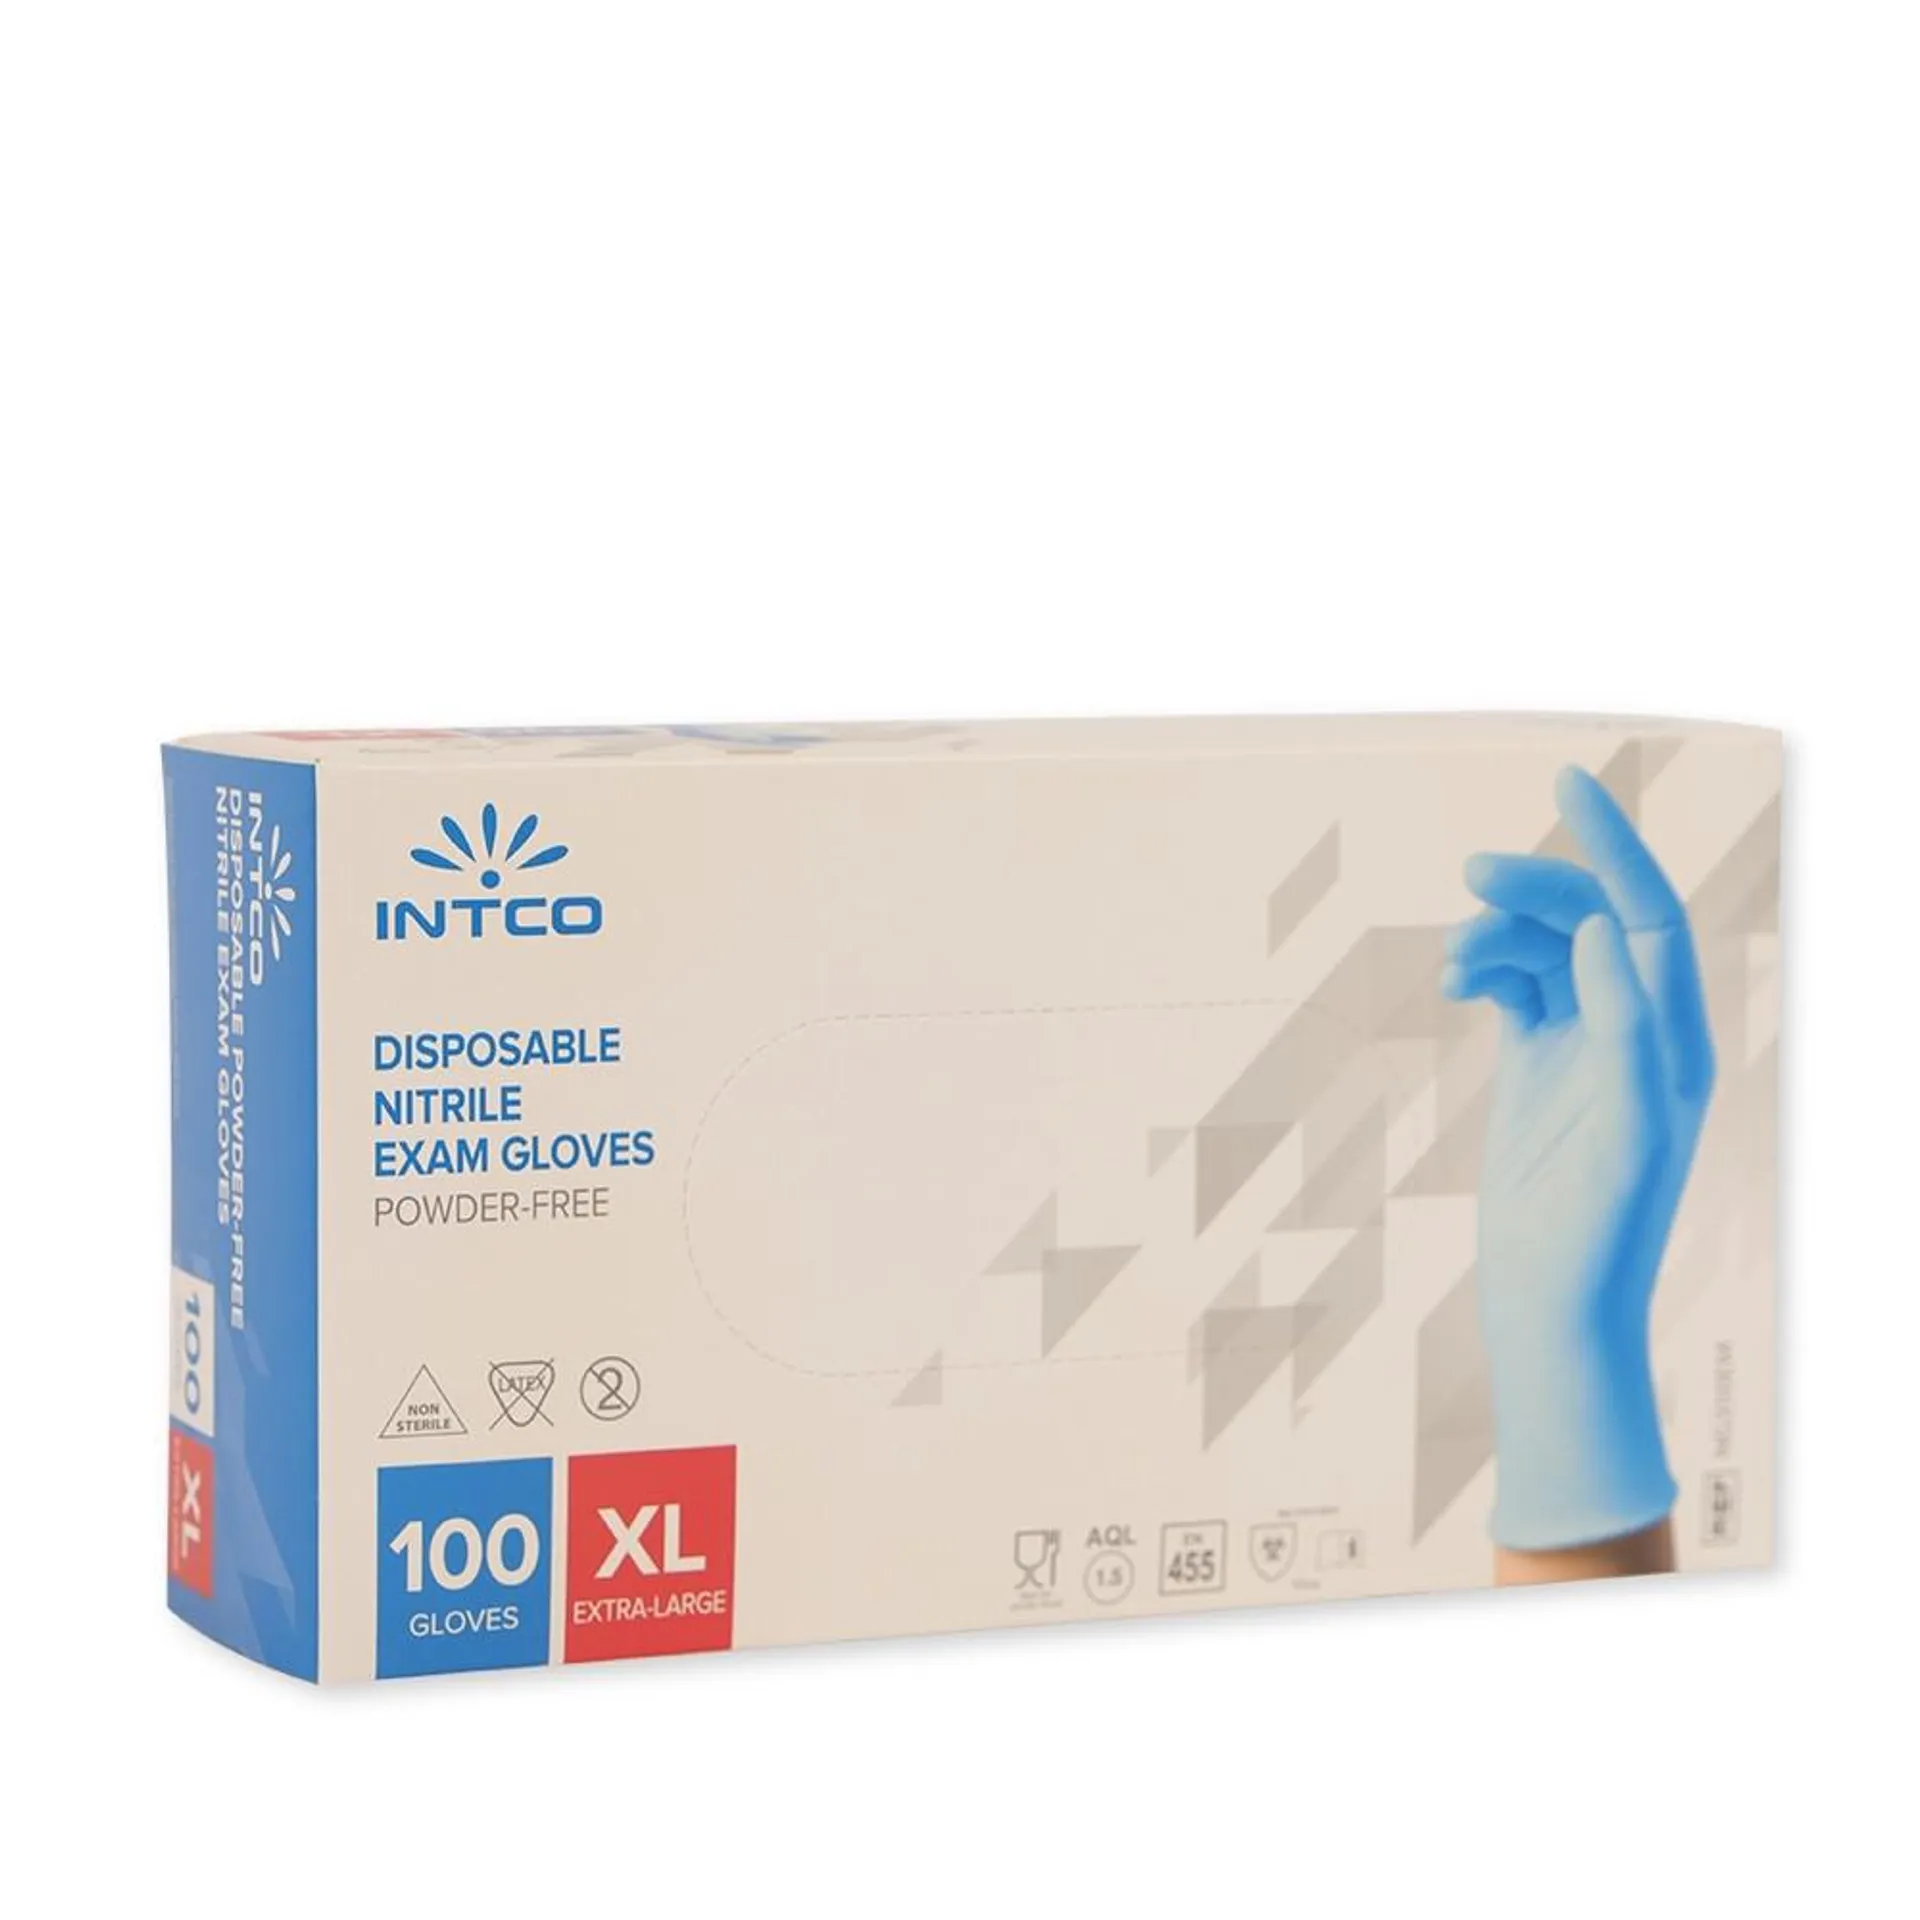 100 DISPOSABLE NITRILE GLOVES - EXTRA LARGE